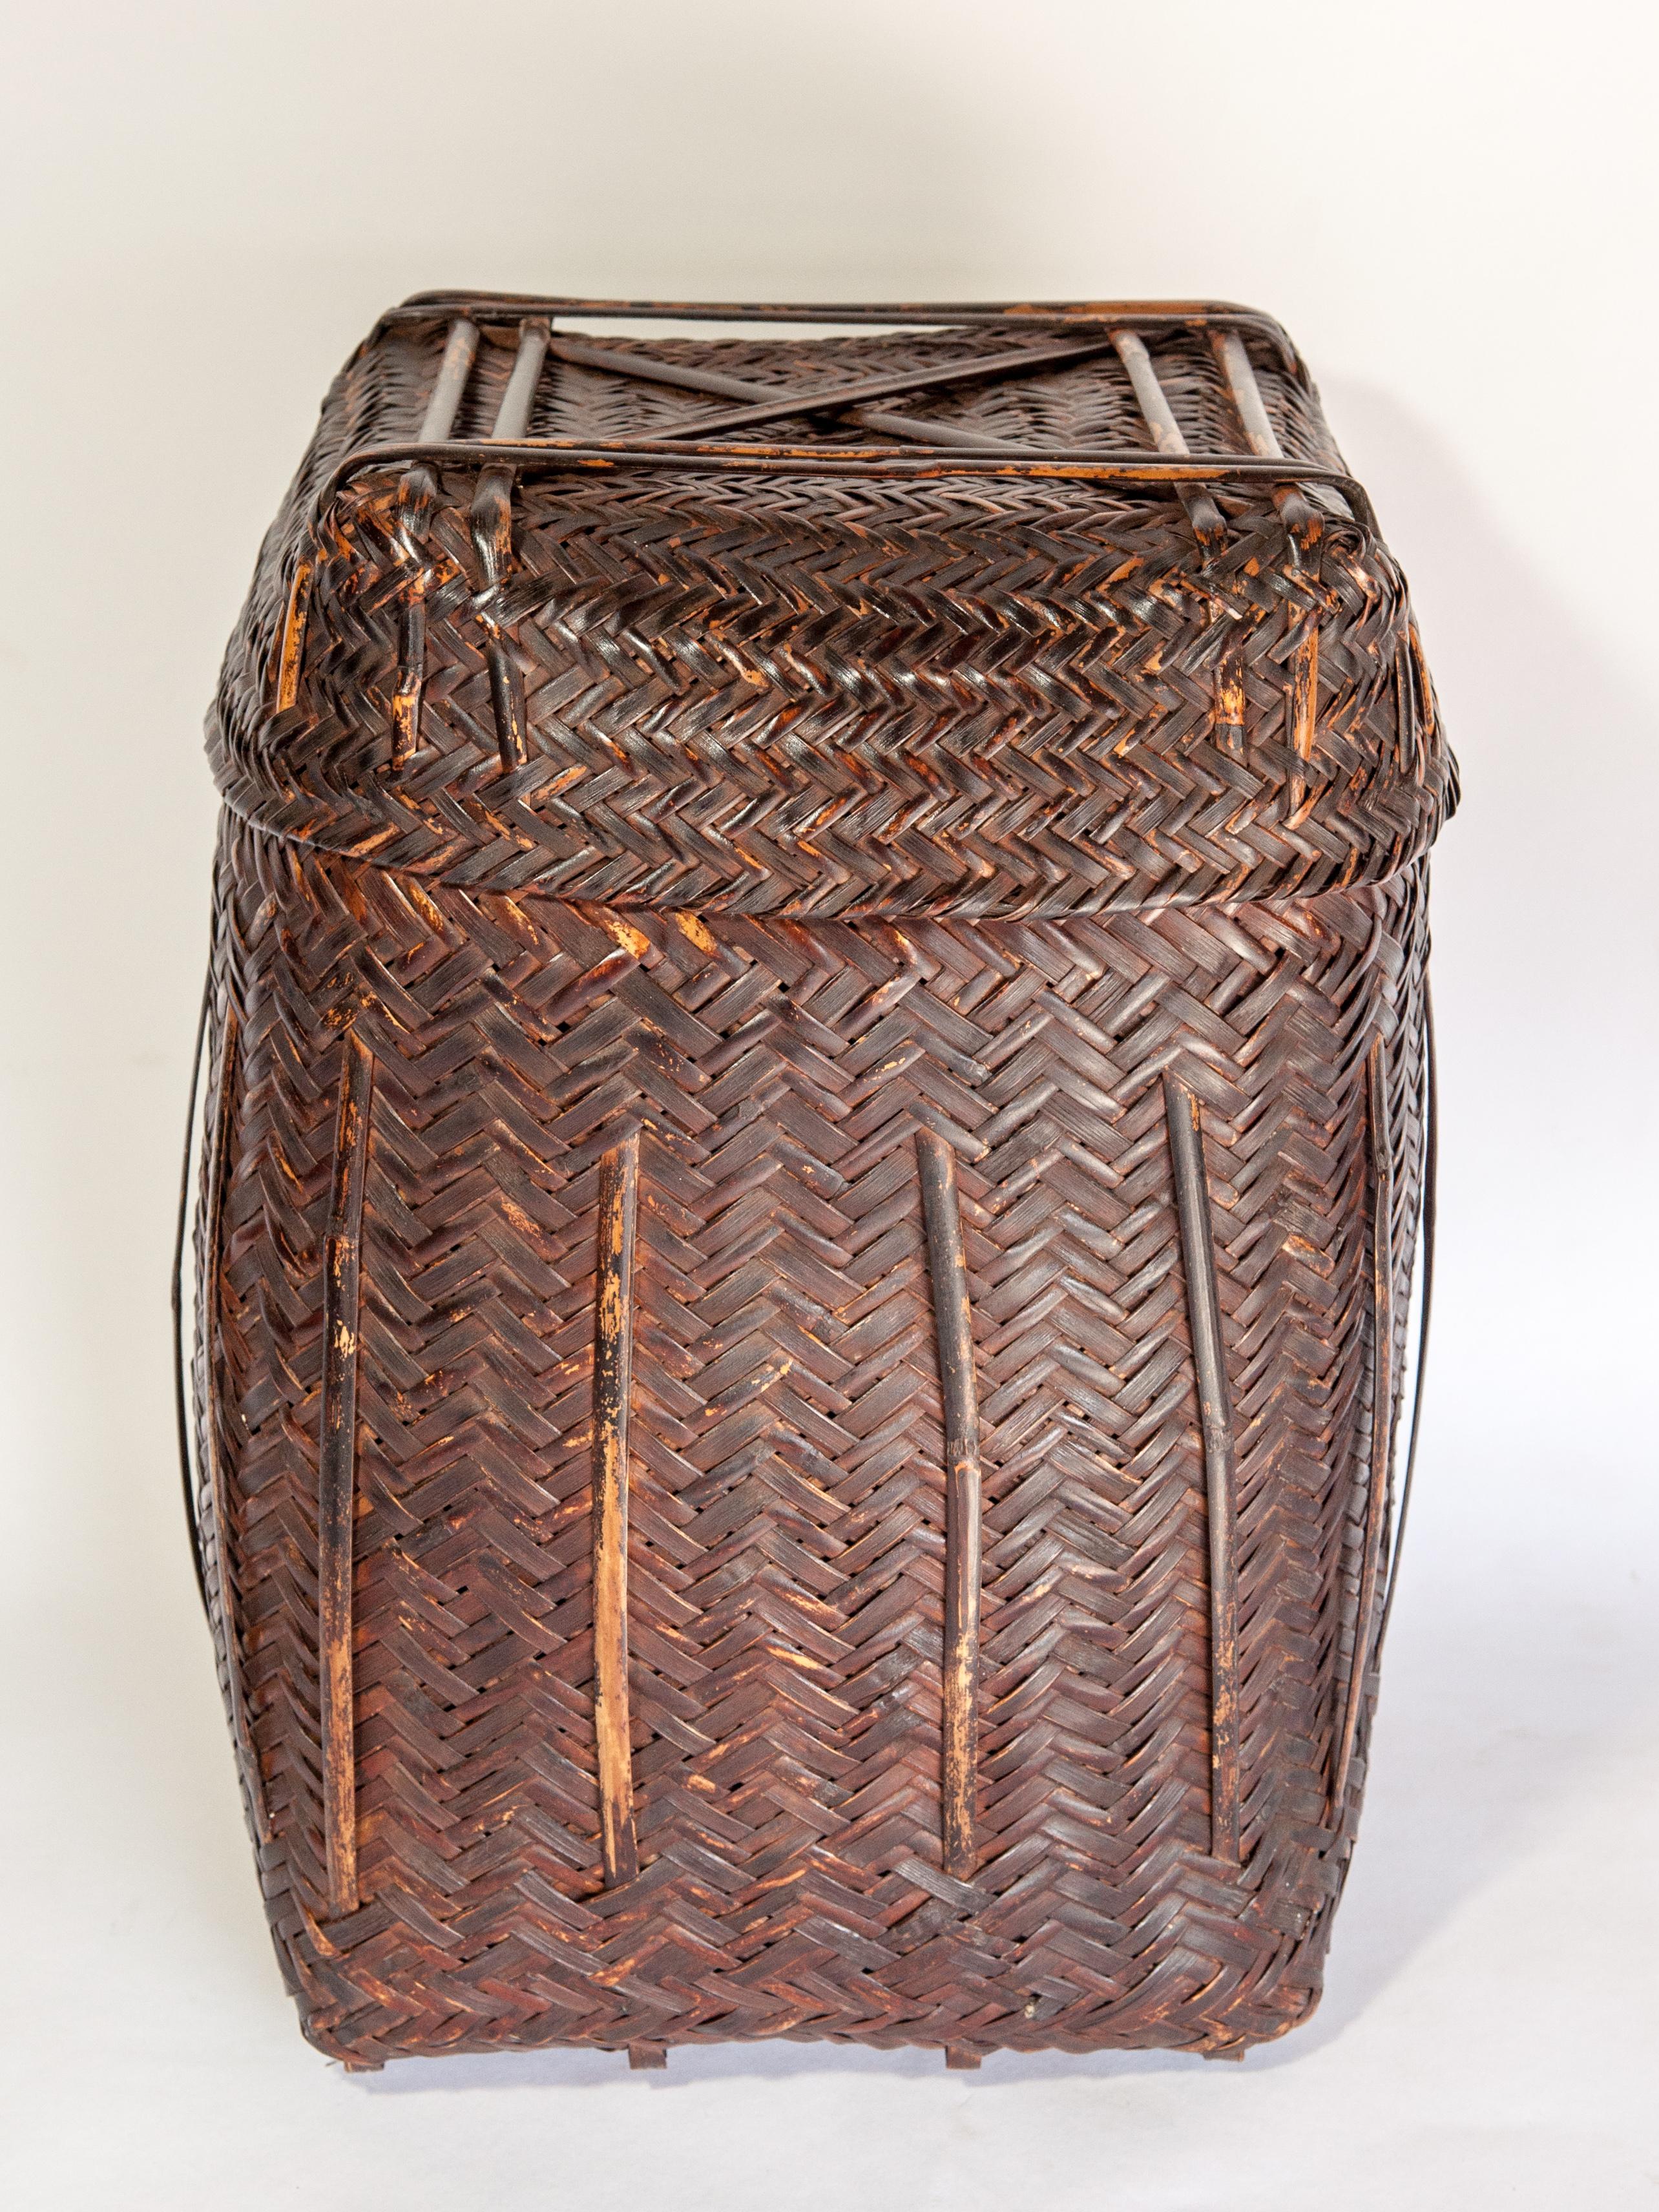 Hand-Crafted Tribal Storage Basket Box with Lid from the Magar of Nepal, Mid-20th Century